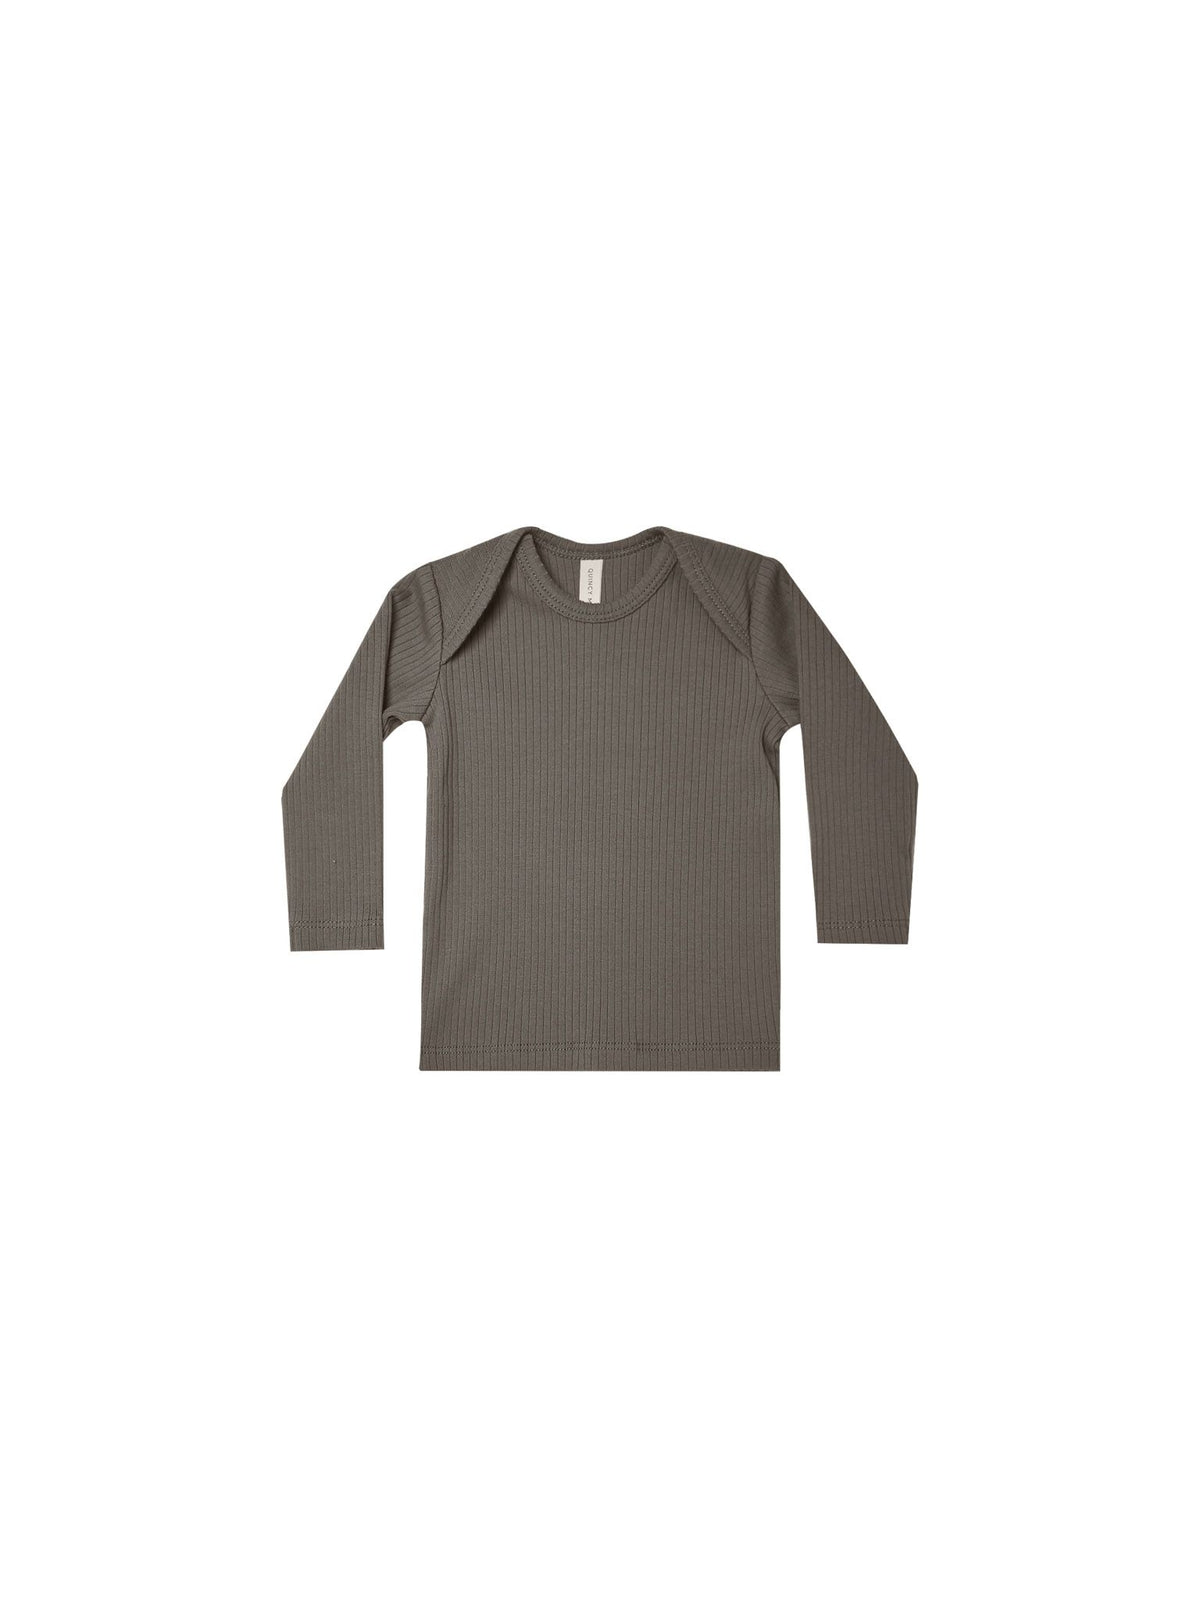 Quincy Mae Charcoal ribbed long sleeve tee against white backdrop